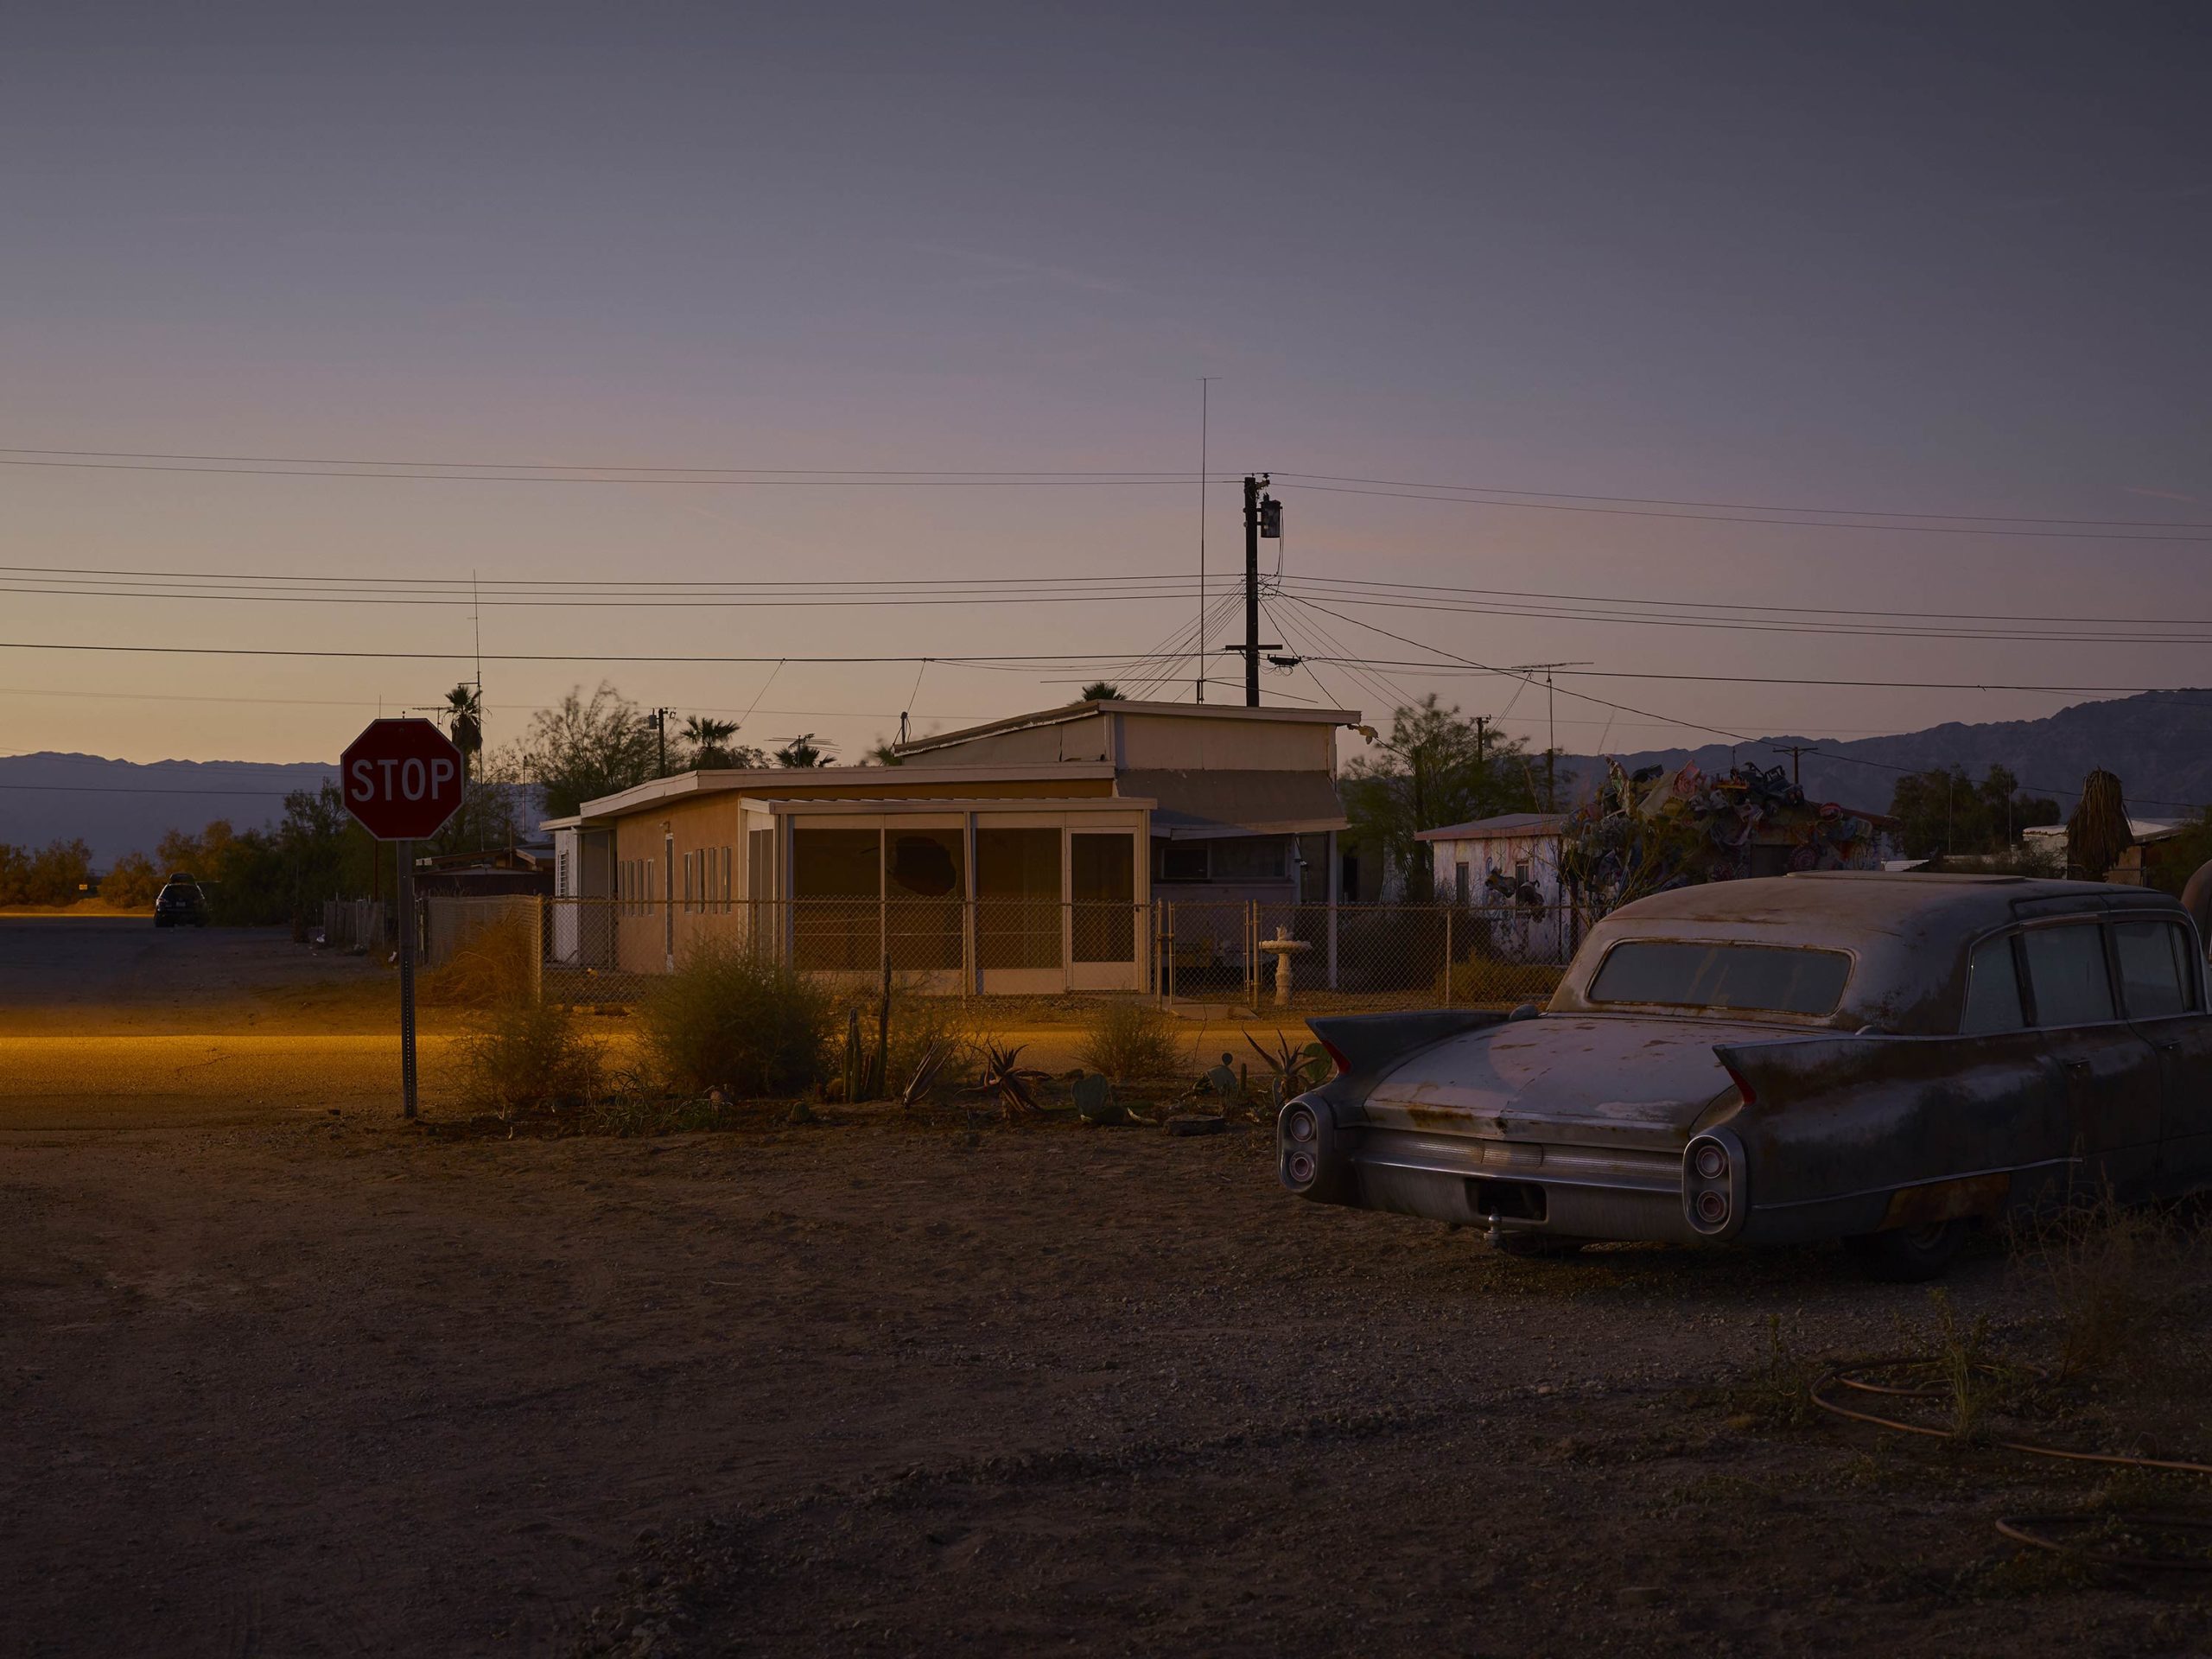 Some Velvet Morning - Welcome To Bombay Beach Collection - Fine Art Photography by Toby Dixon